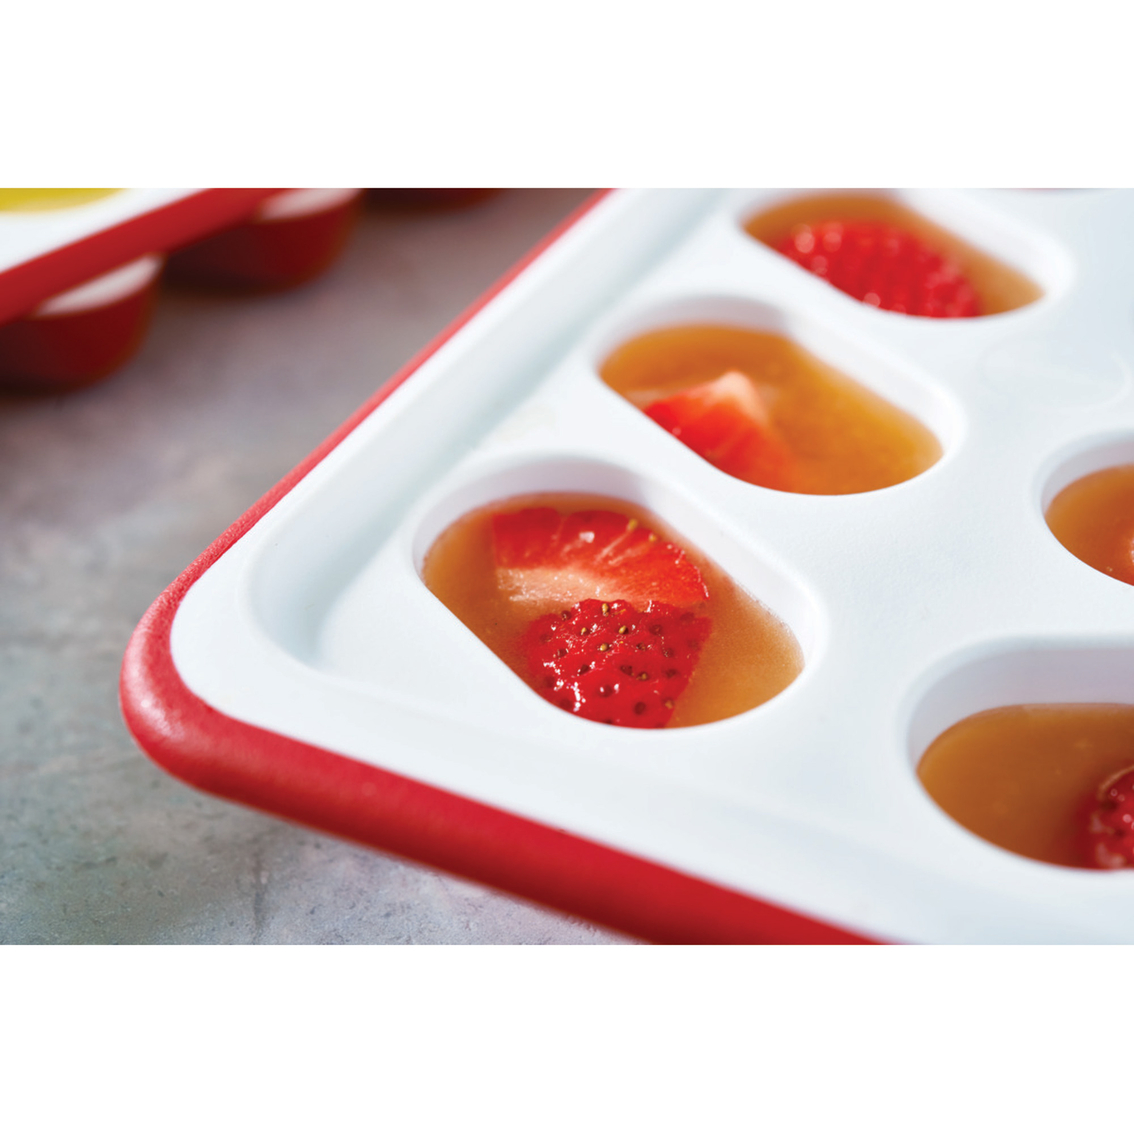 Rubbermaid Easy Release Flexible Ice Tray - Image 2 of 4